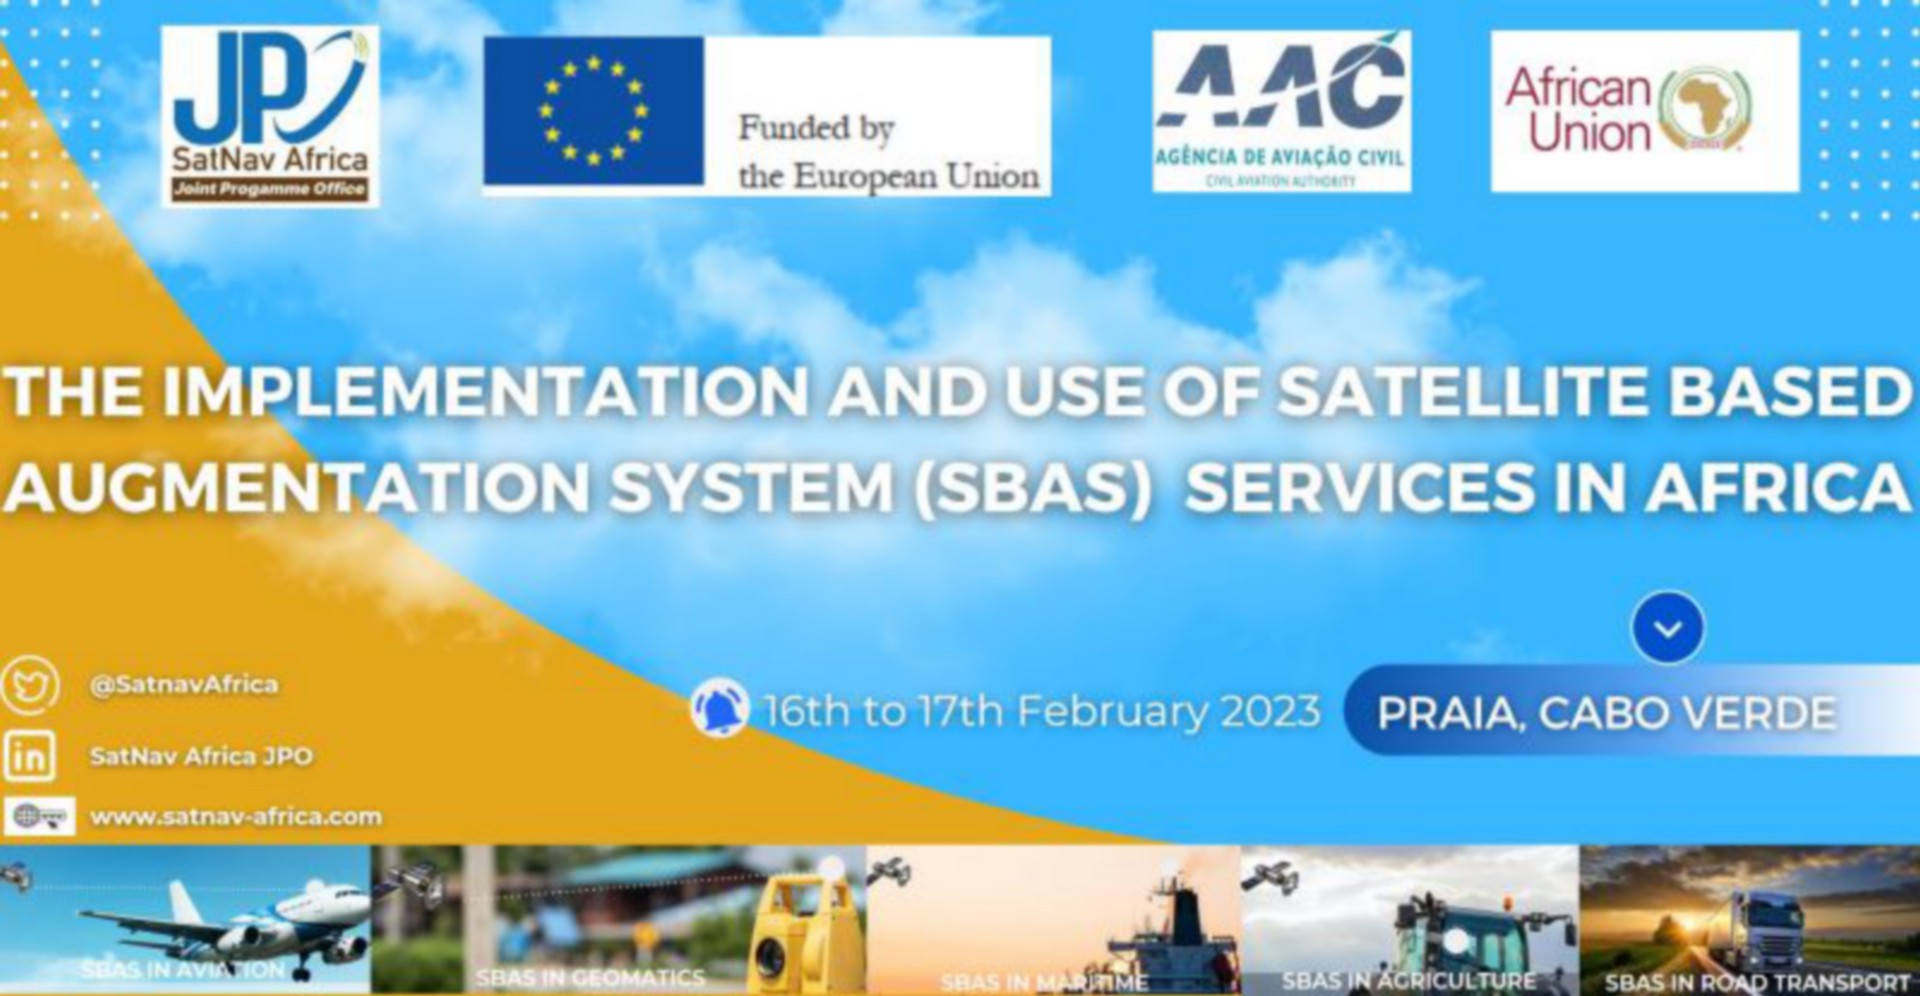 Workshop on the Implementation and use of Satellite Based Augmentation System (SBAS) Services in Africa,16th -17th February 2023, Praia, Cape Verde